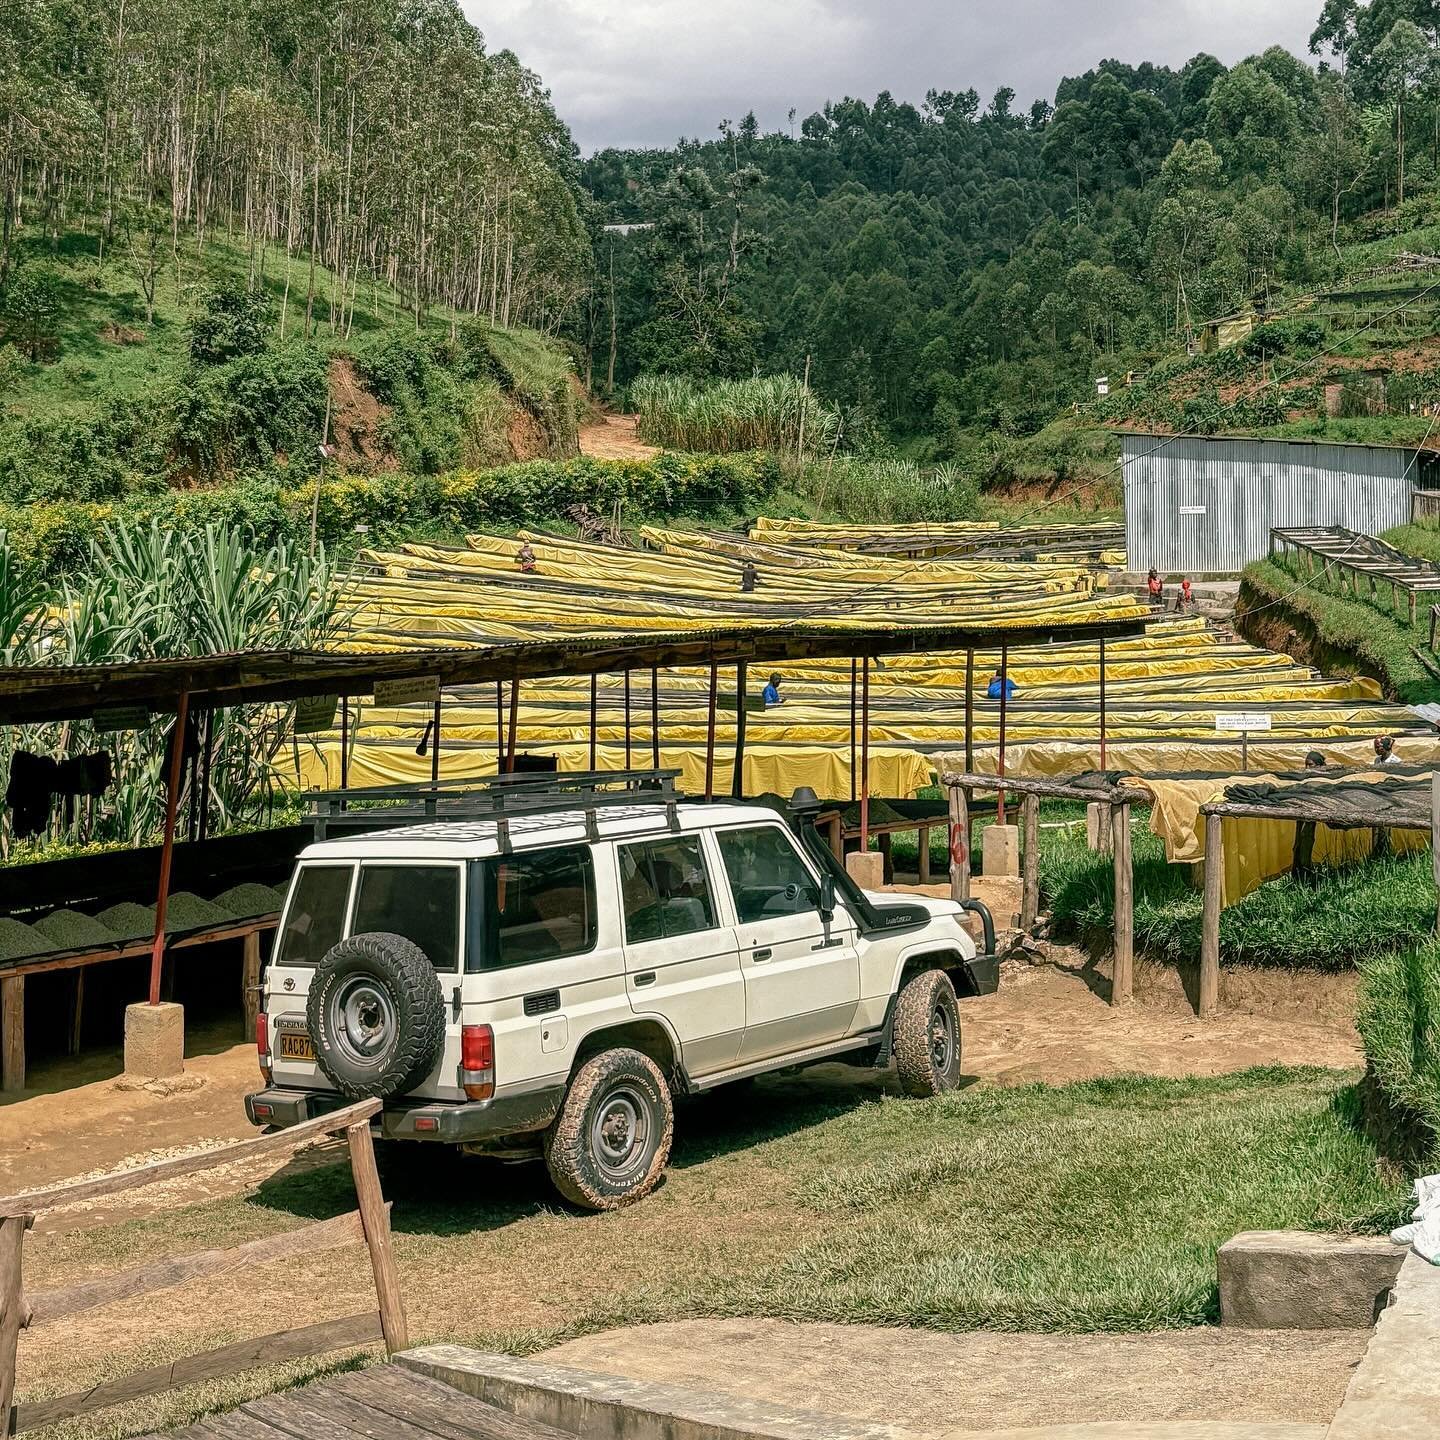 Rwanda is preeeeetty beautiful. This clean, plastic bag free country full of cool af Land Cruisers, big smiles and waves, lush greens overflowing onto intense red-brown roads boasts happiness all over.

Making your way through winding valleys of rice